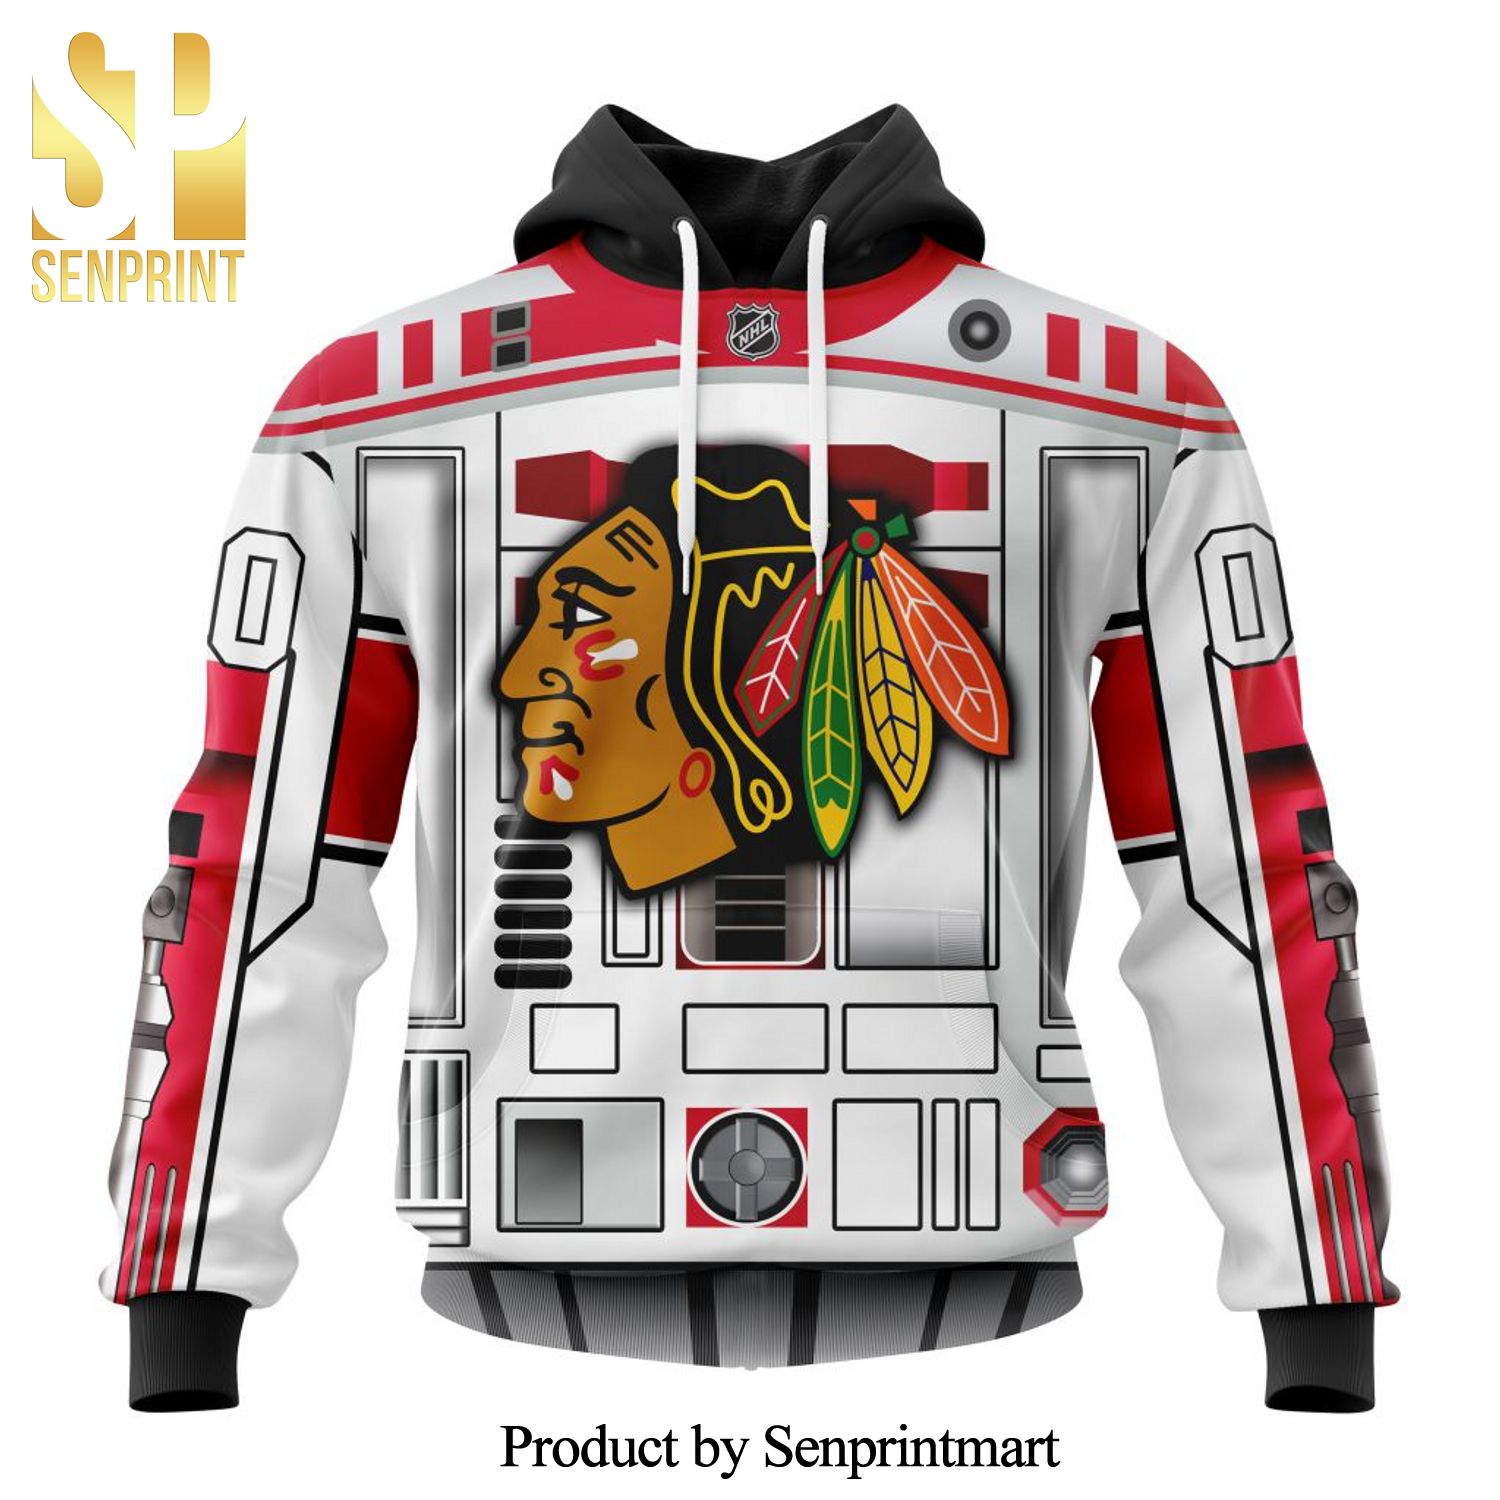 NHL Chicago BlackHawks Version Star Wars May The 4th Be With You All Over Printed Shirt